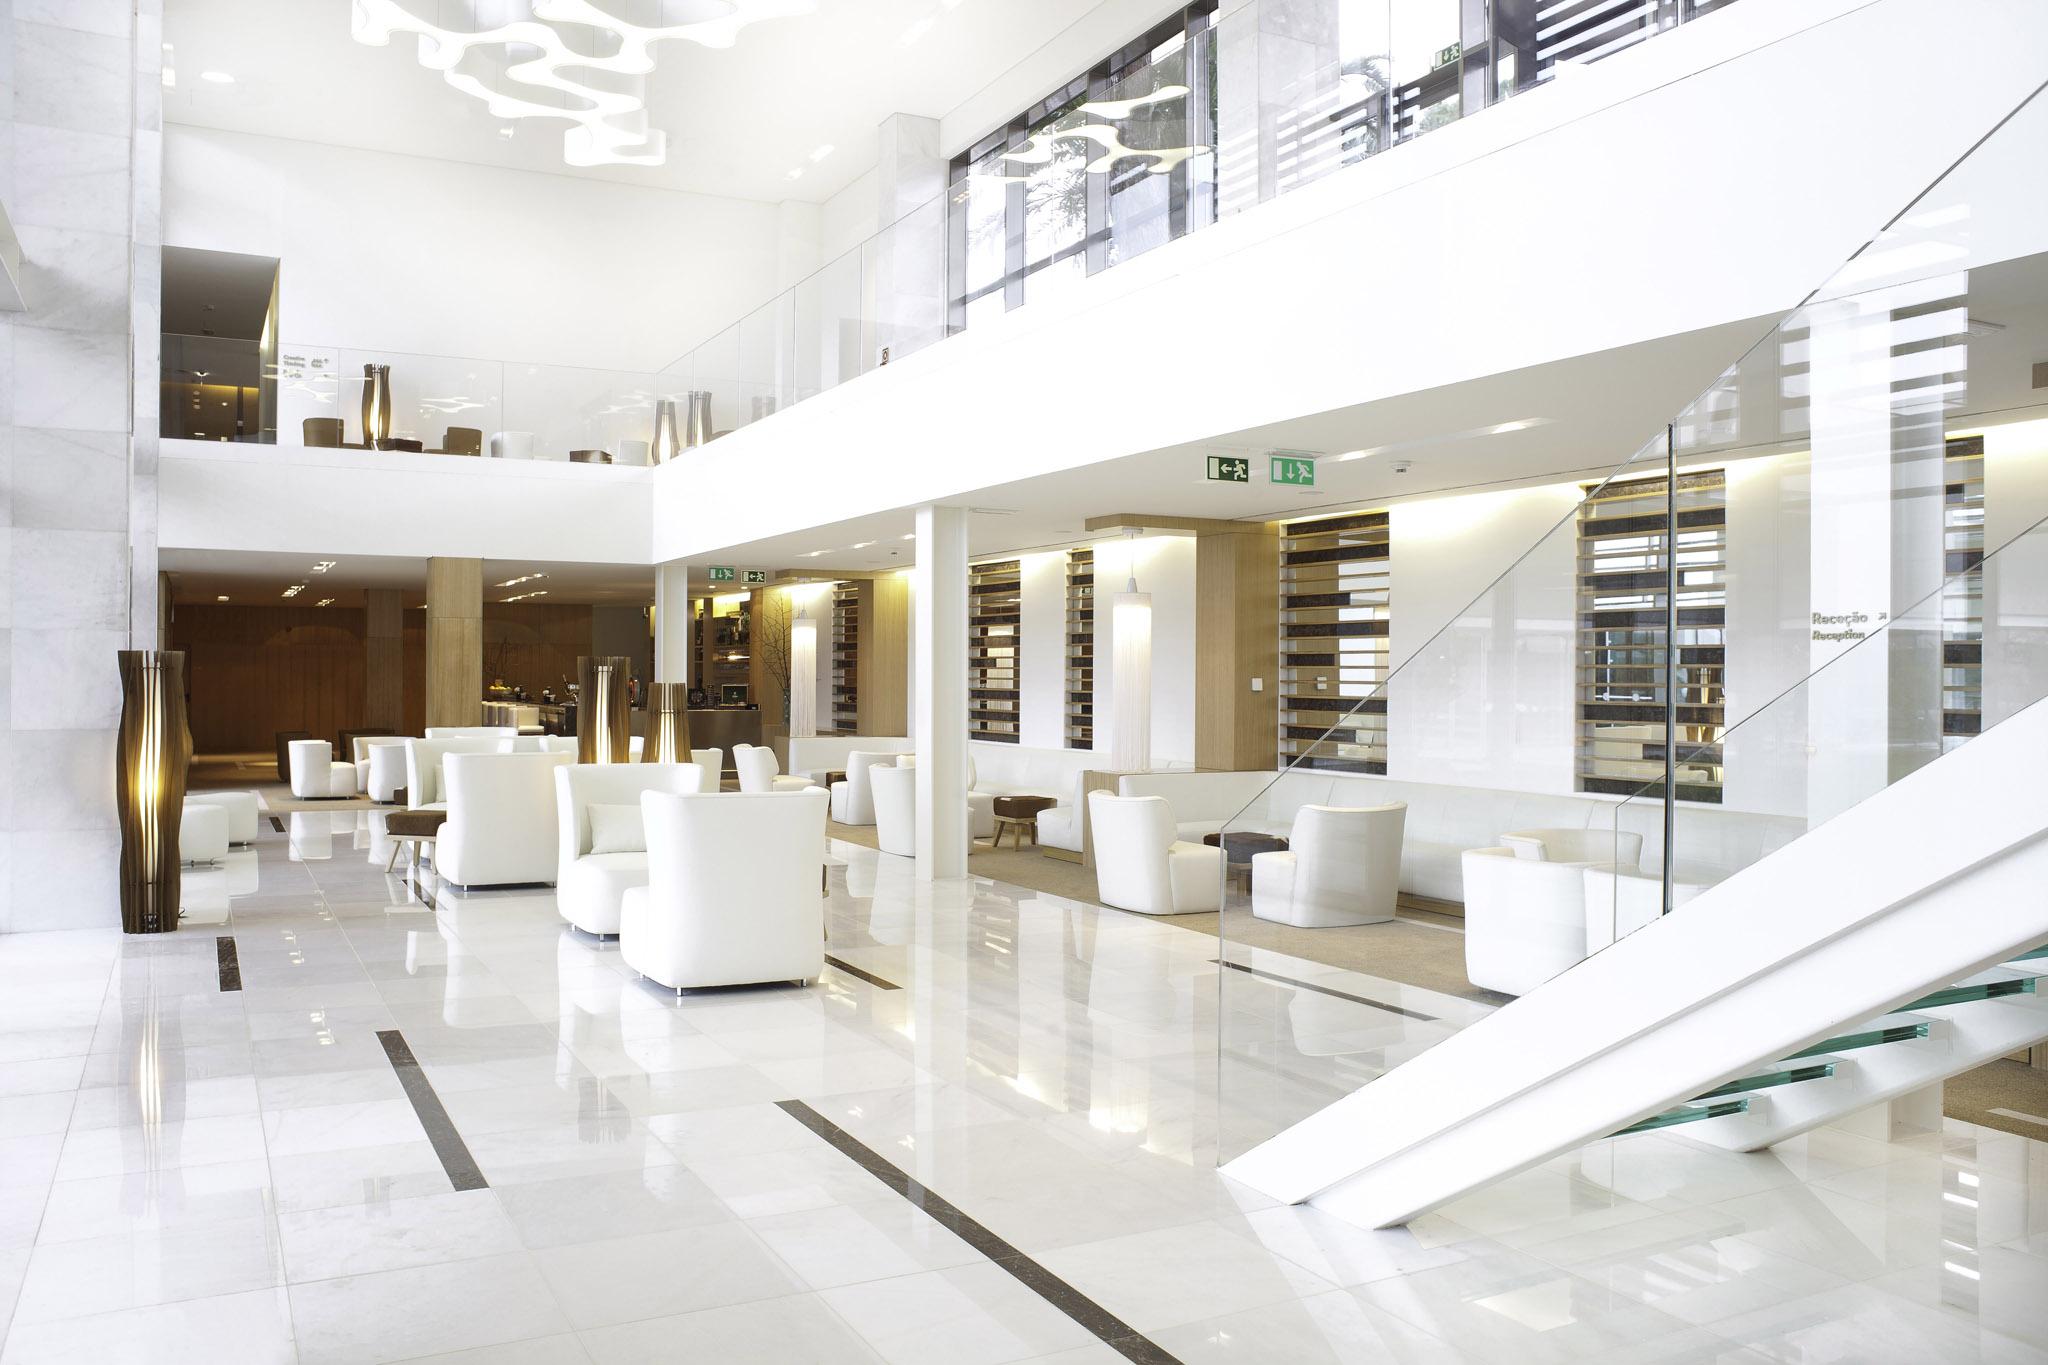 The lobby at Martinhal Cascais, the third hotel in the growing chain